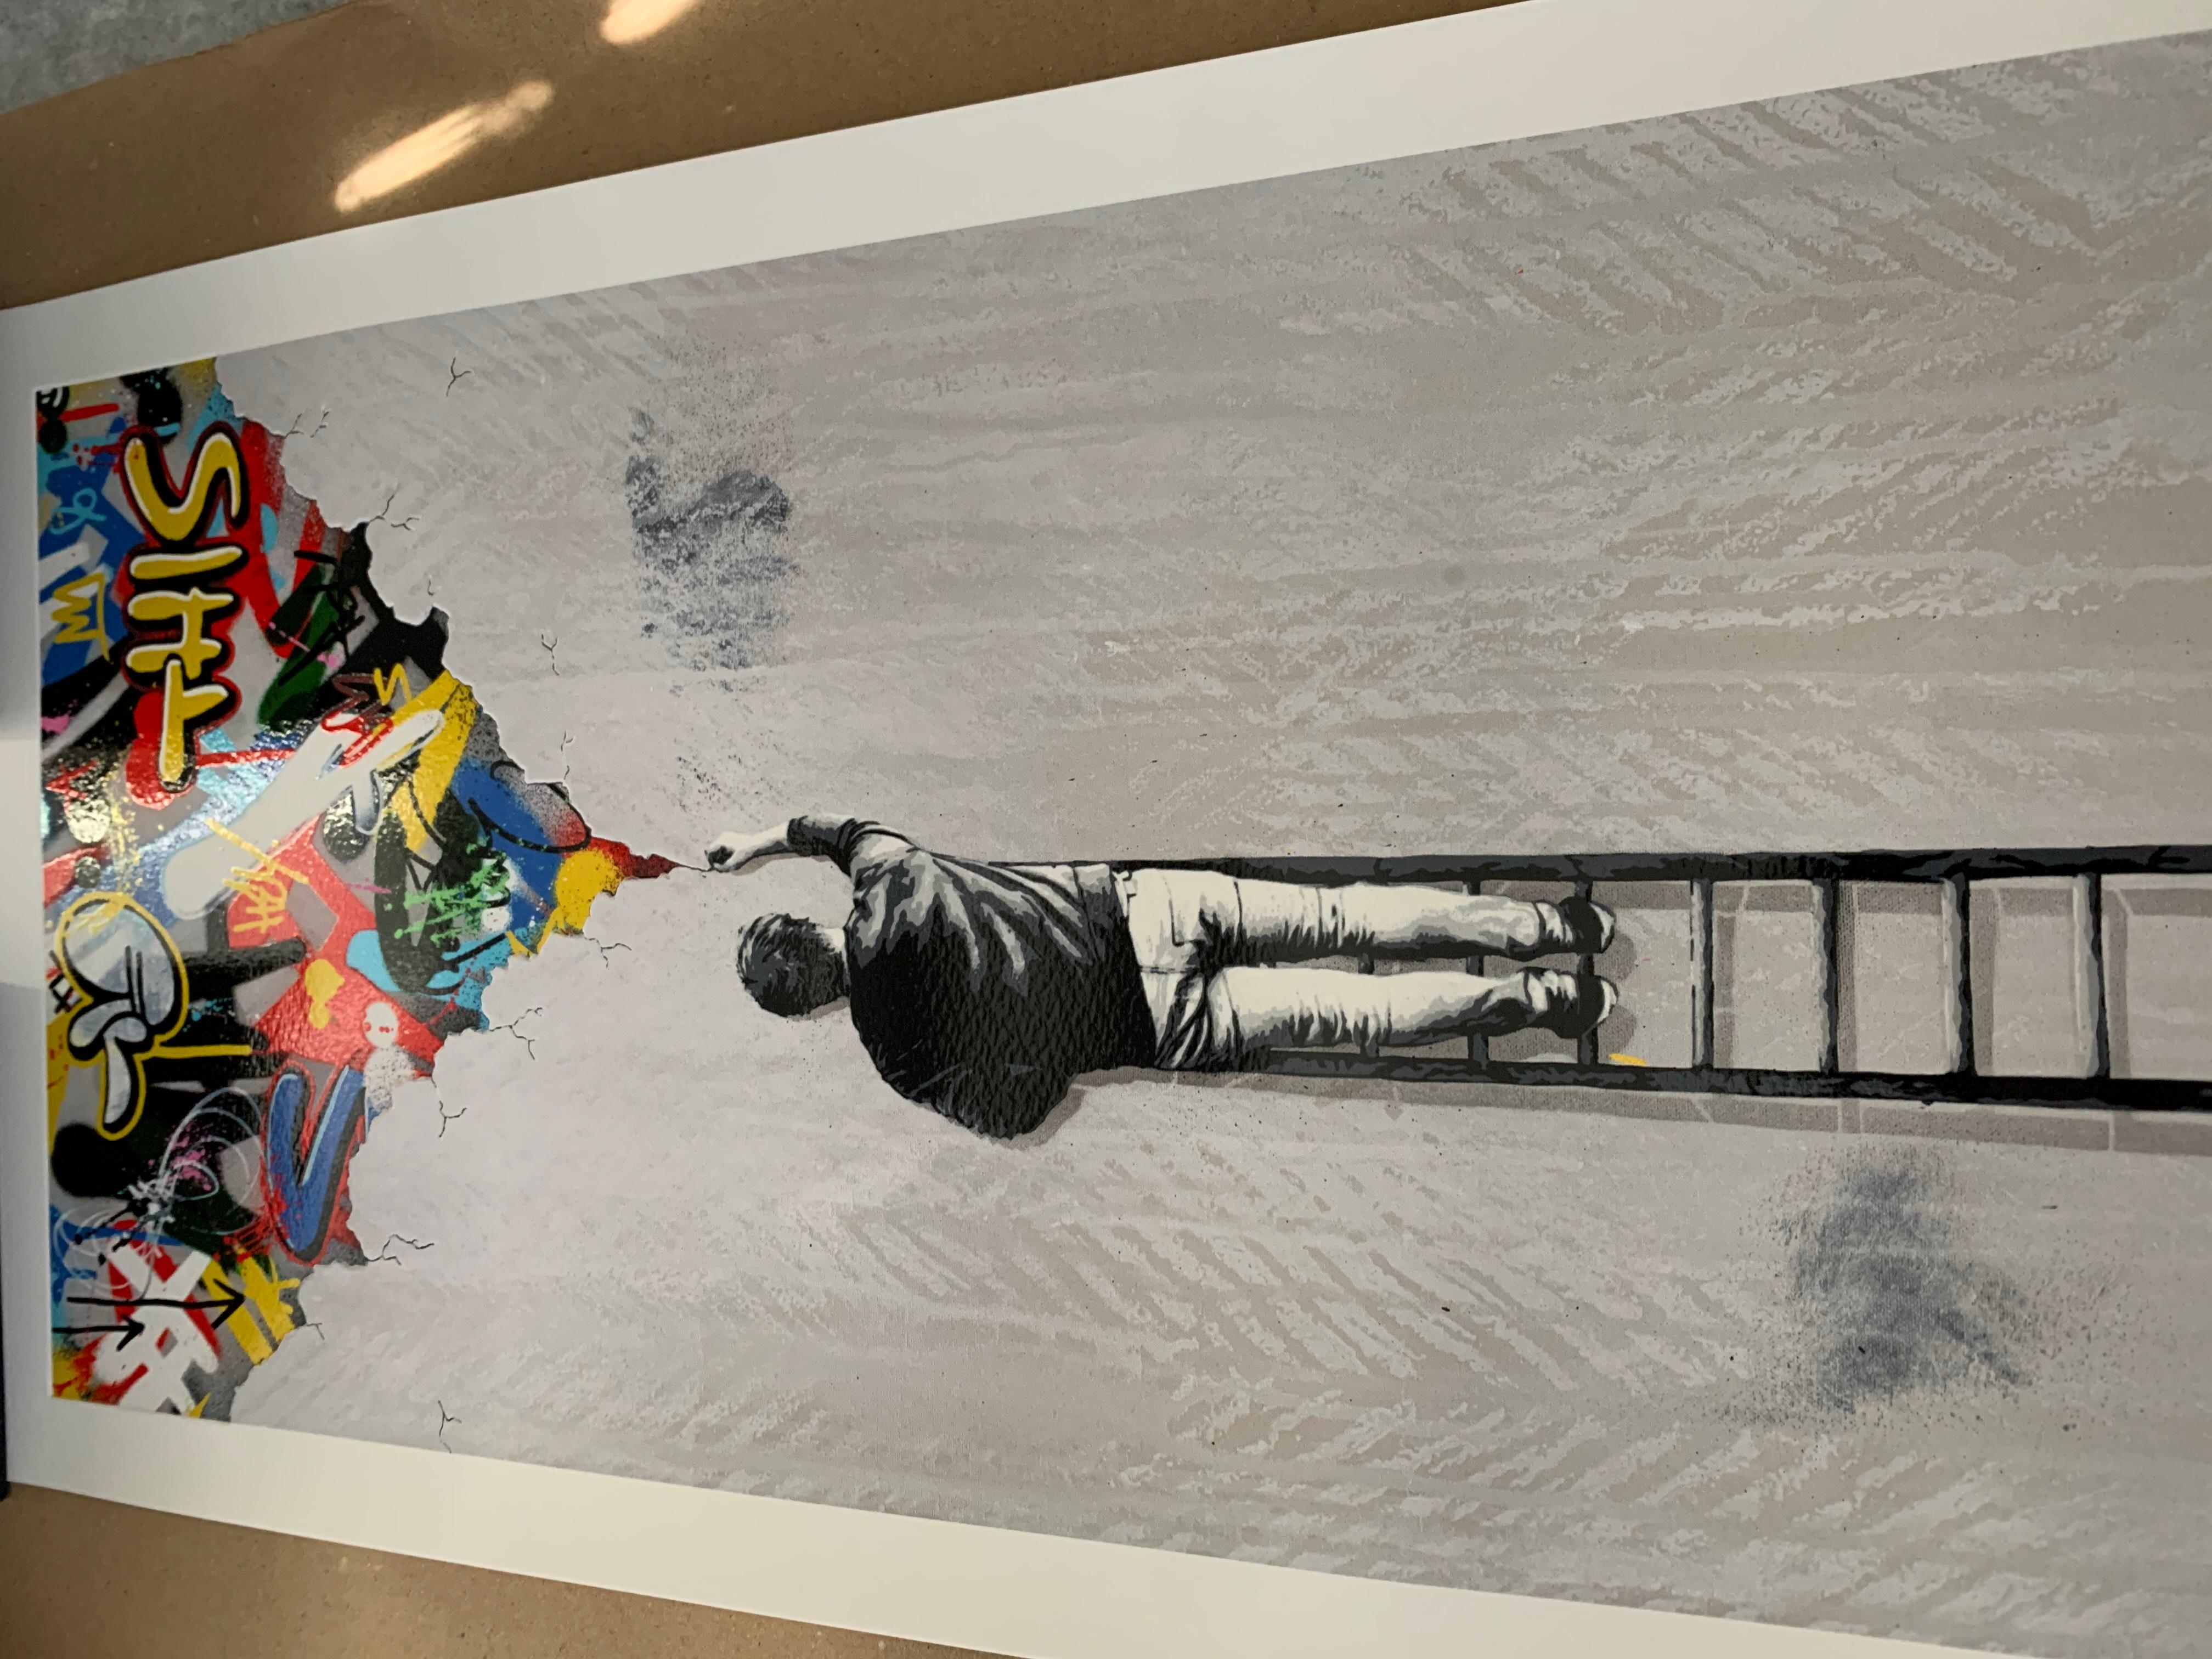 MARTIN WHATSON THE CRACK Timed Edition Screen print COA Stamped Graffiti Prints.



Giclee with 7 Colour Screen Print On 300 Gsm Somerset satin Paper
Paper embossed around the crack for a 3D effect with the graffiti in the background
Open